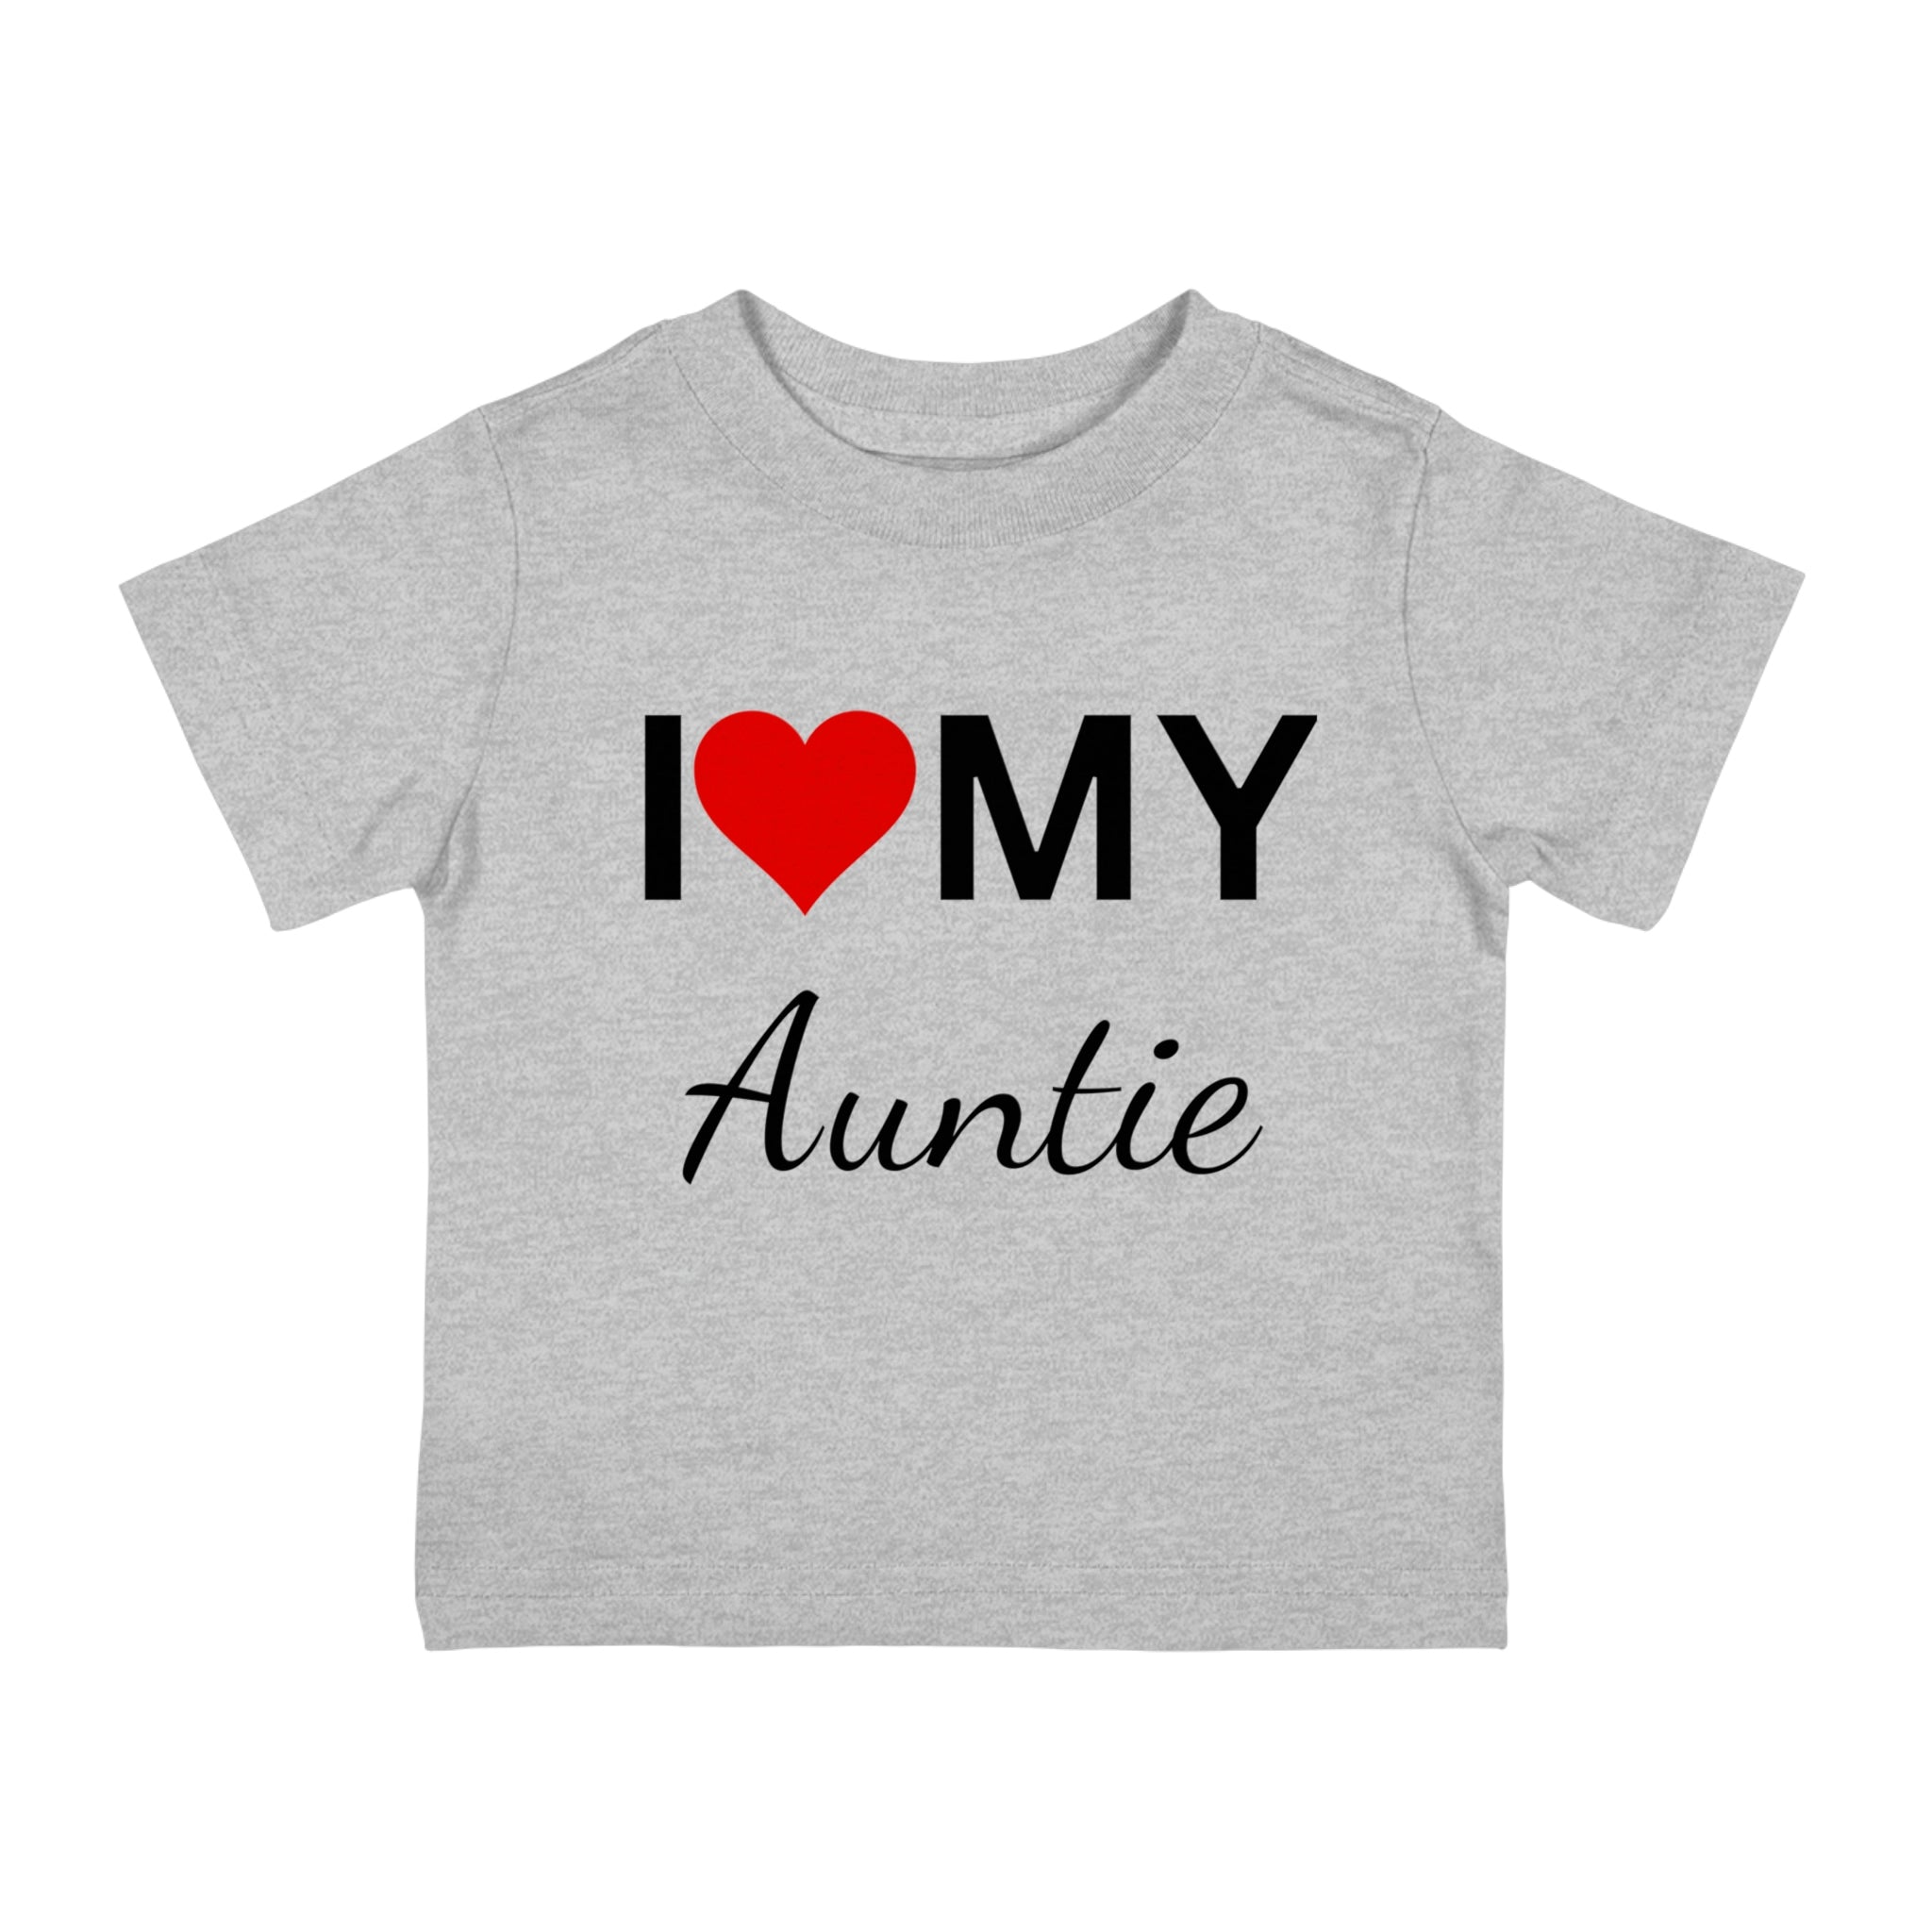 I Love My Auntie Infant Shirt, Baby Tee, Infant Tee